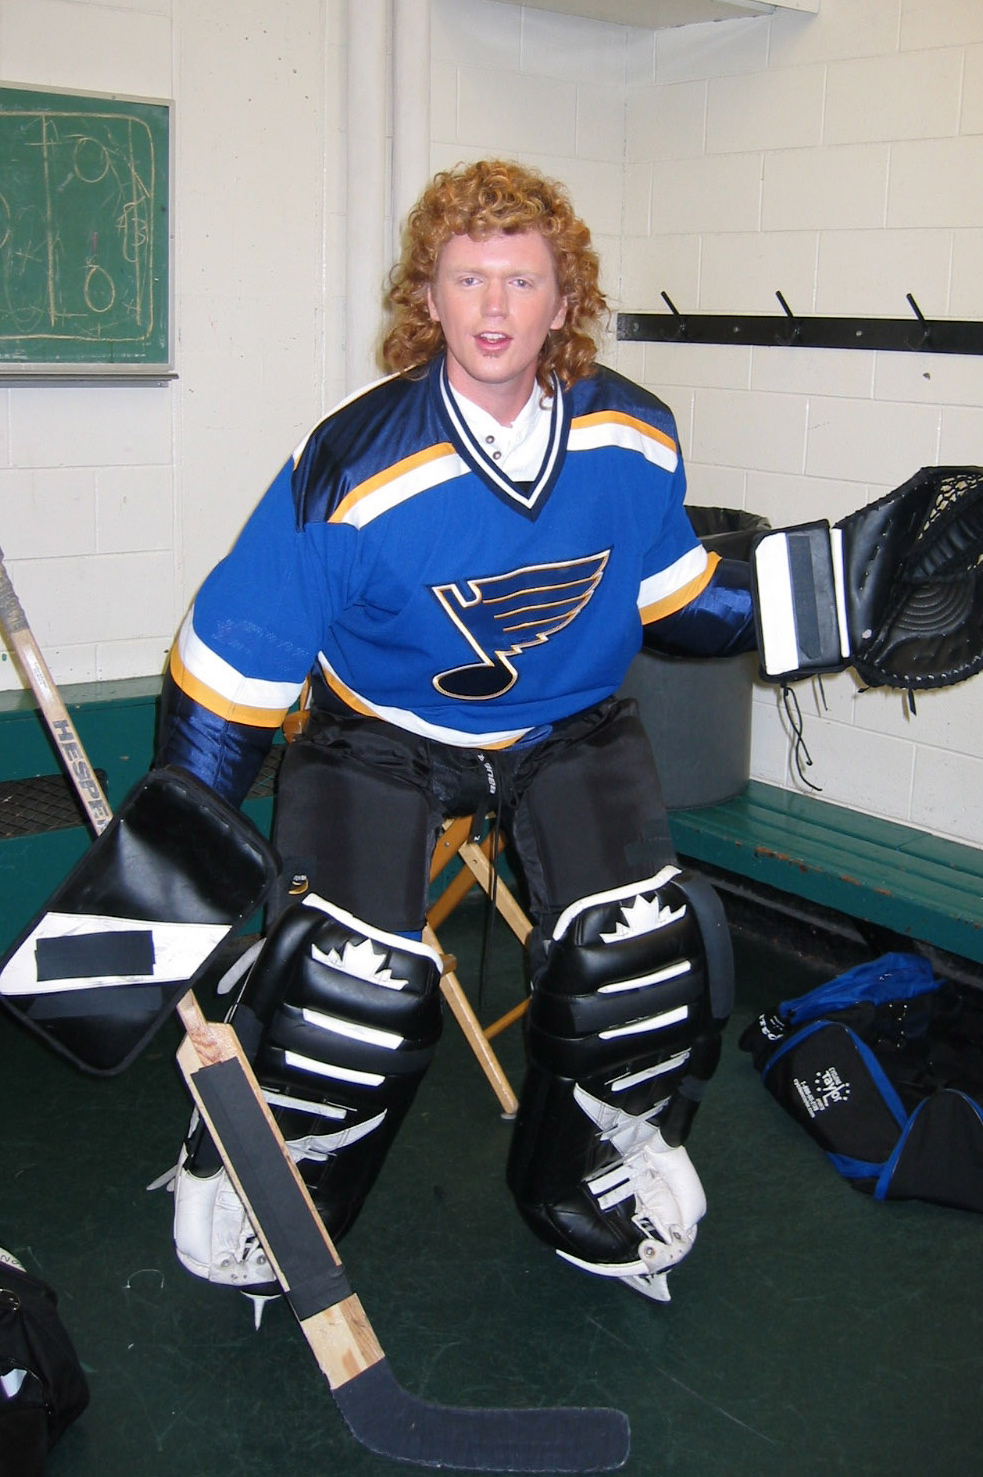 When I played for St. Louis. But really for Bud Light.